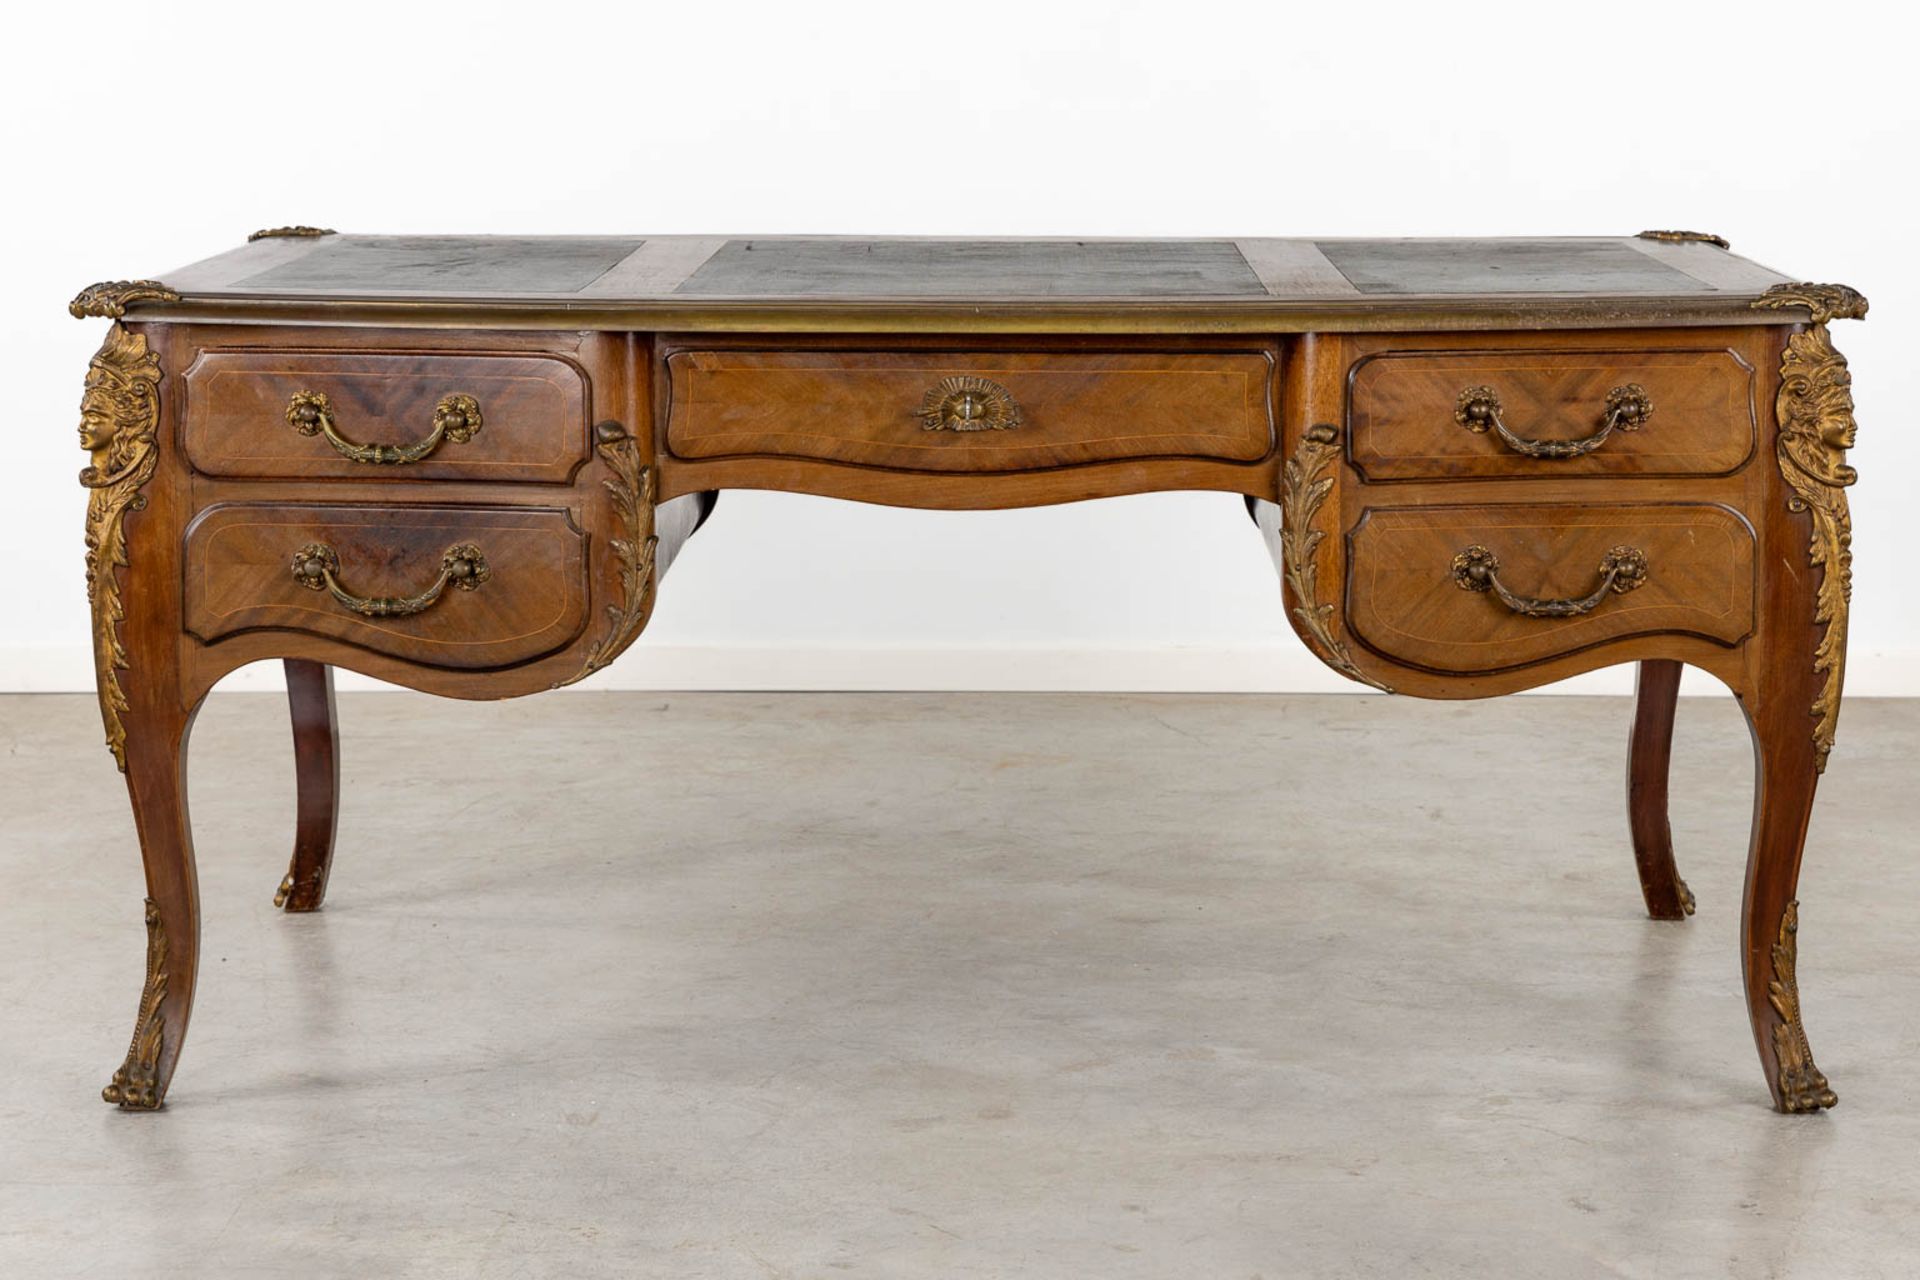 A richly decorated desk, wood mounted with bronze and standing on claw feet. Circa 1920. (L:100 x W: - Bild 4 aus 14